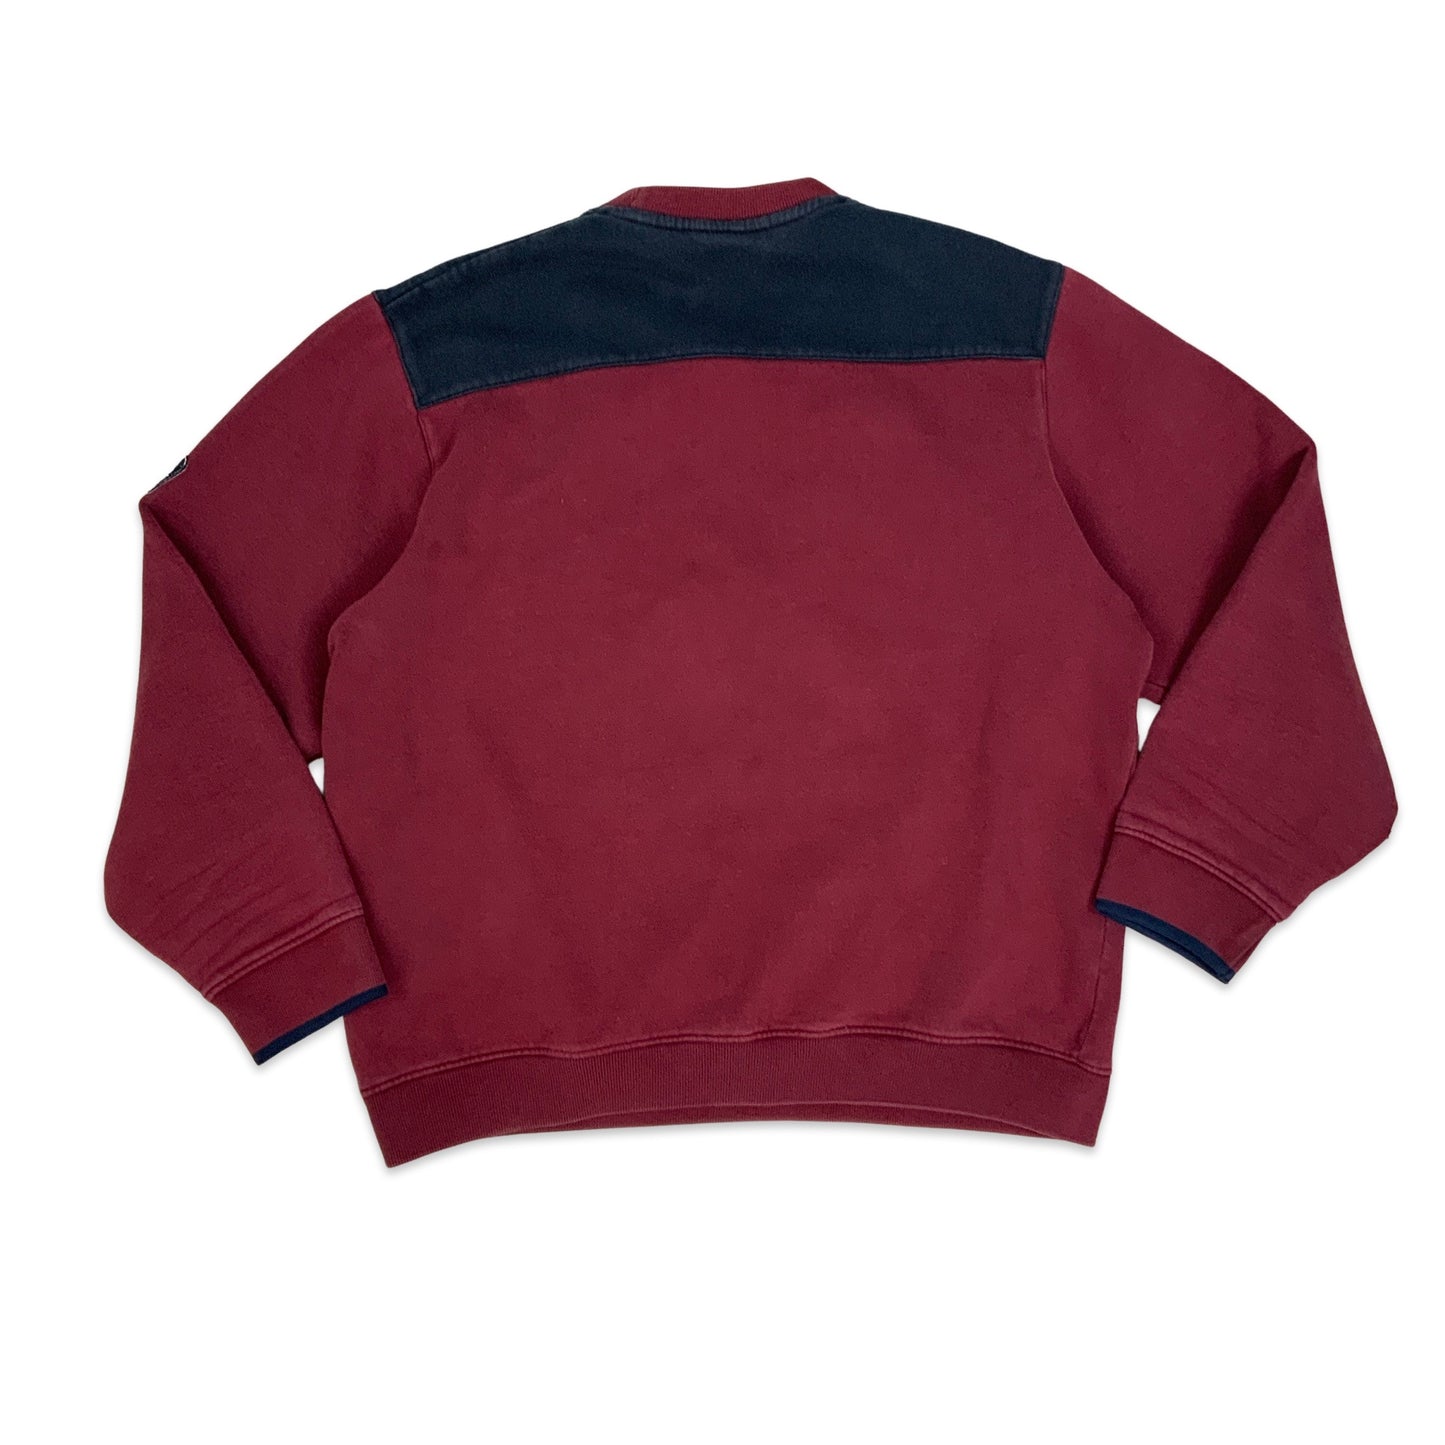 Vintage 00's Adidas Maroon & Navy Spell Out Crew Neck Sweatshirt M L